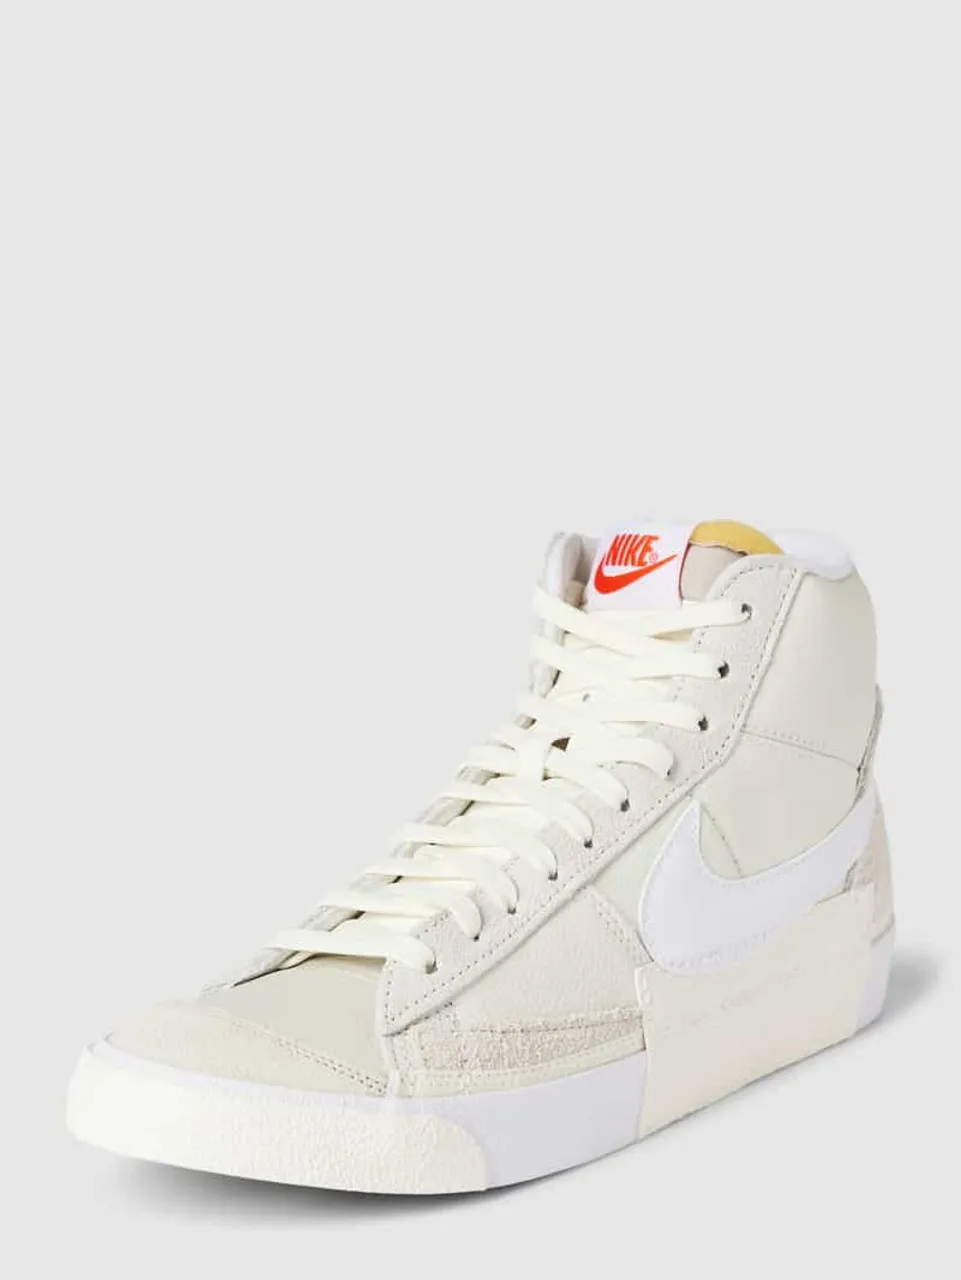 Nike High Top Sneaker aus Leder mit Label-Detail Modell 'Mid Pro Club' in Offwhite